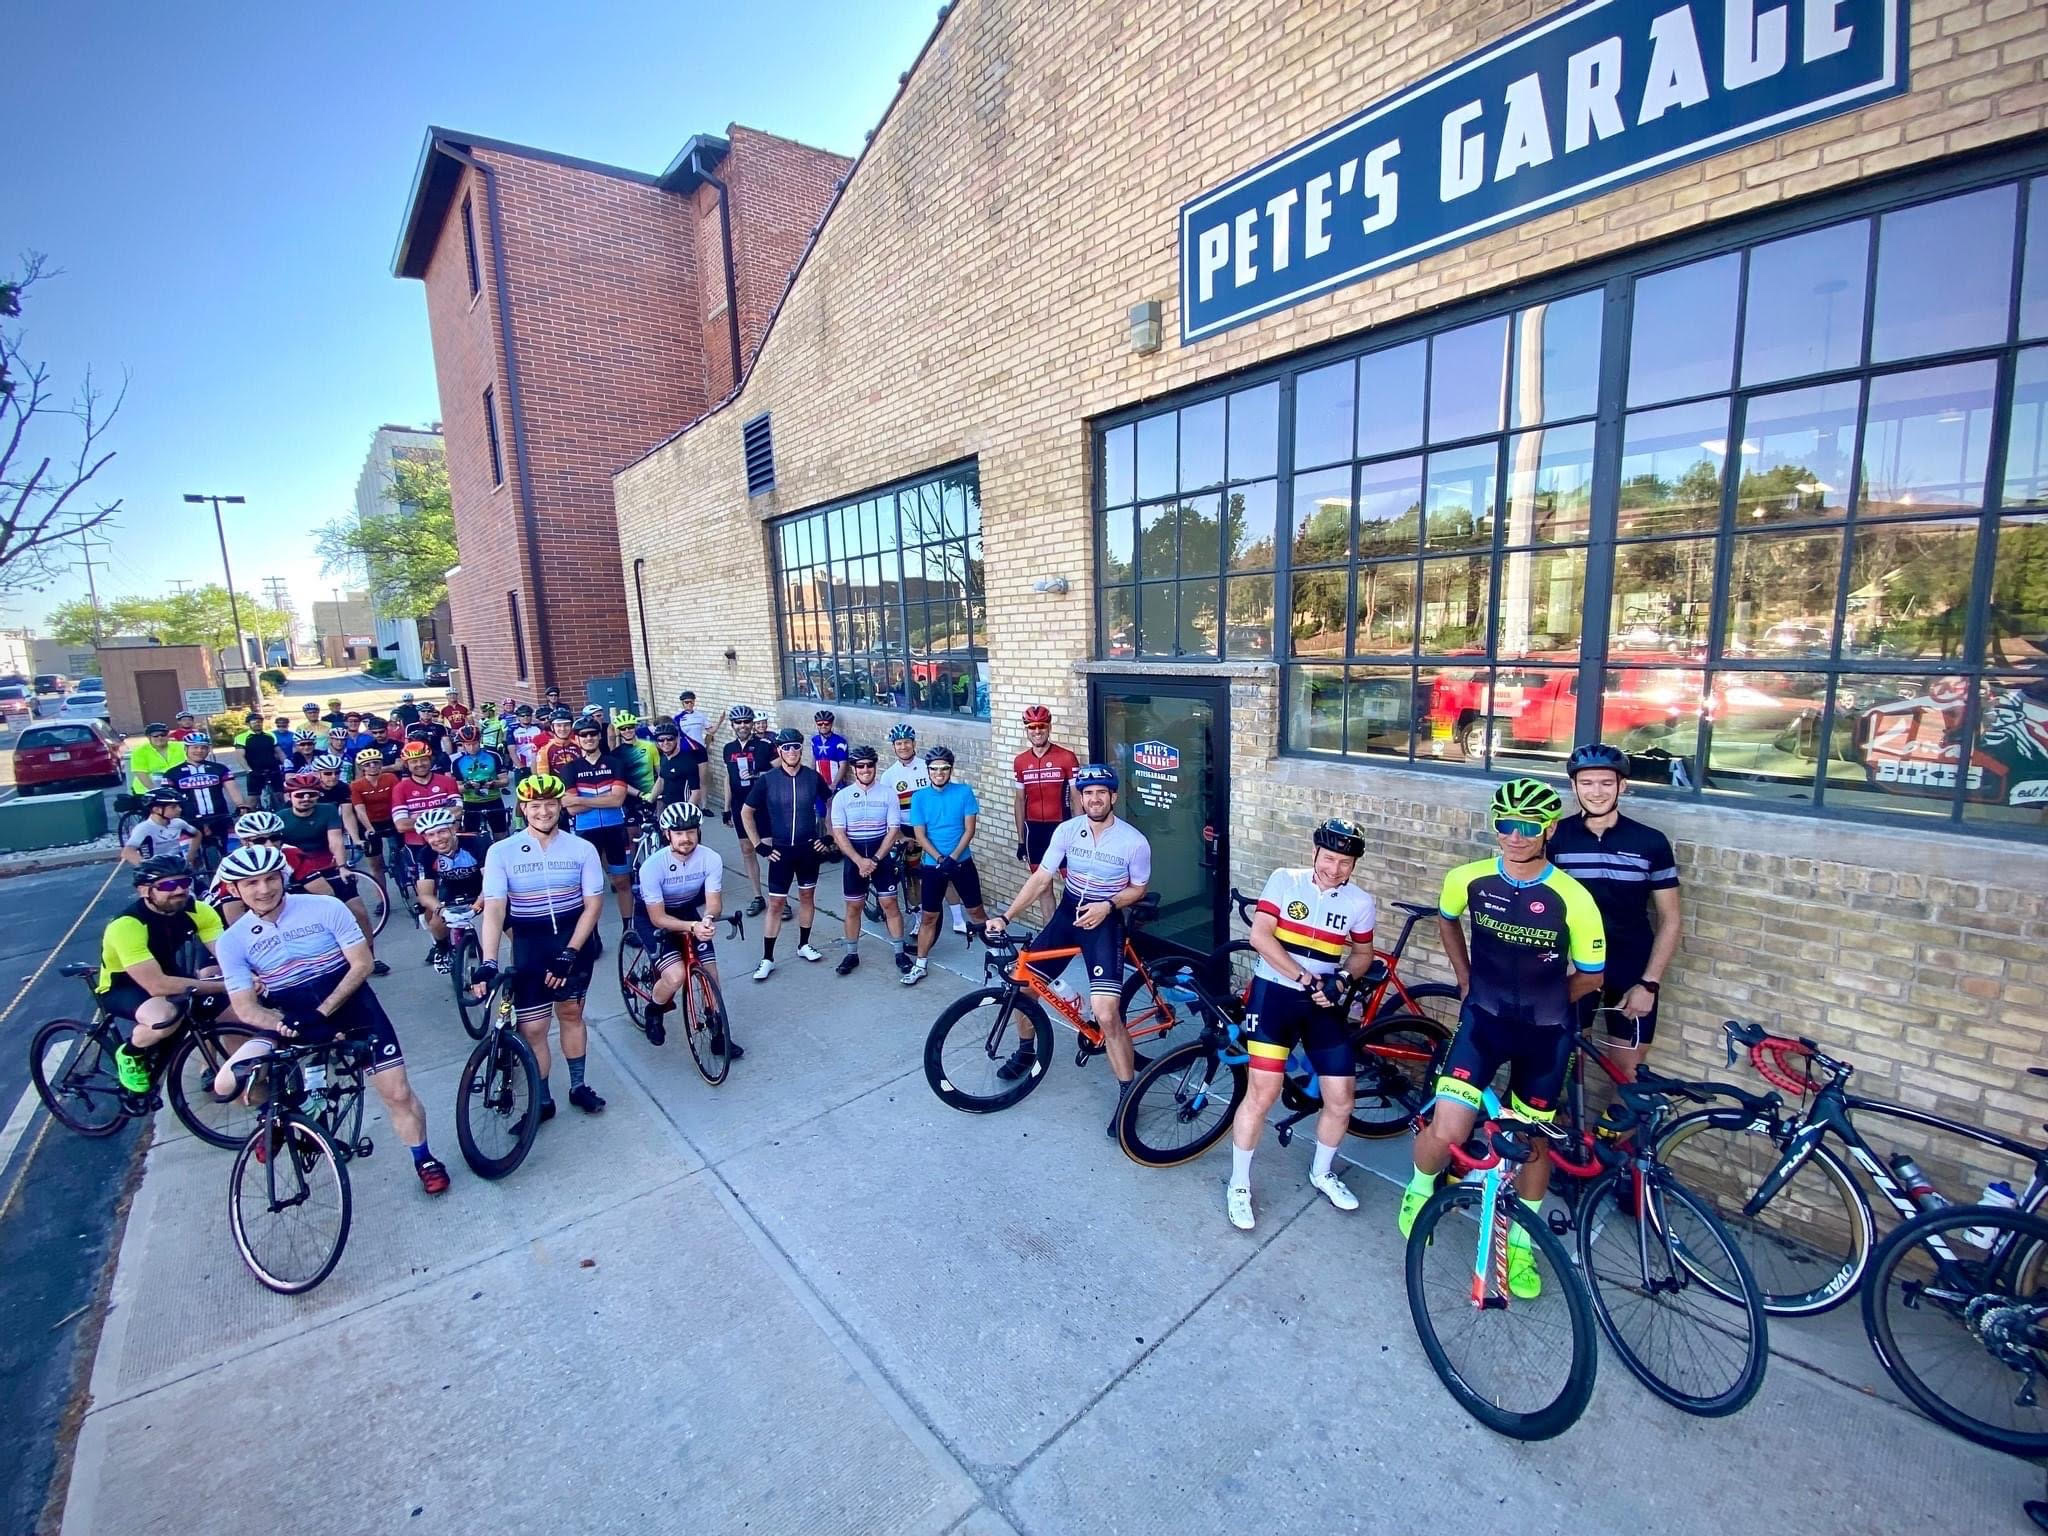 Pete’s Garage builds a community of cyclists during Tuesday Night Ride